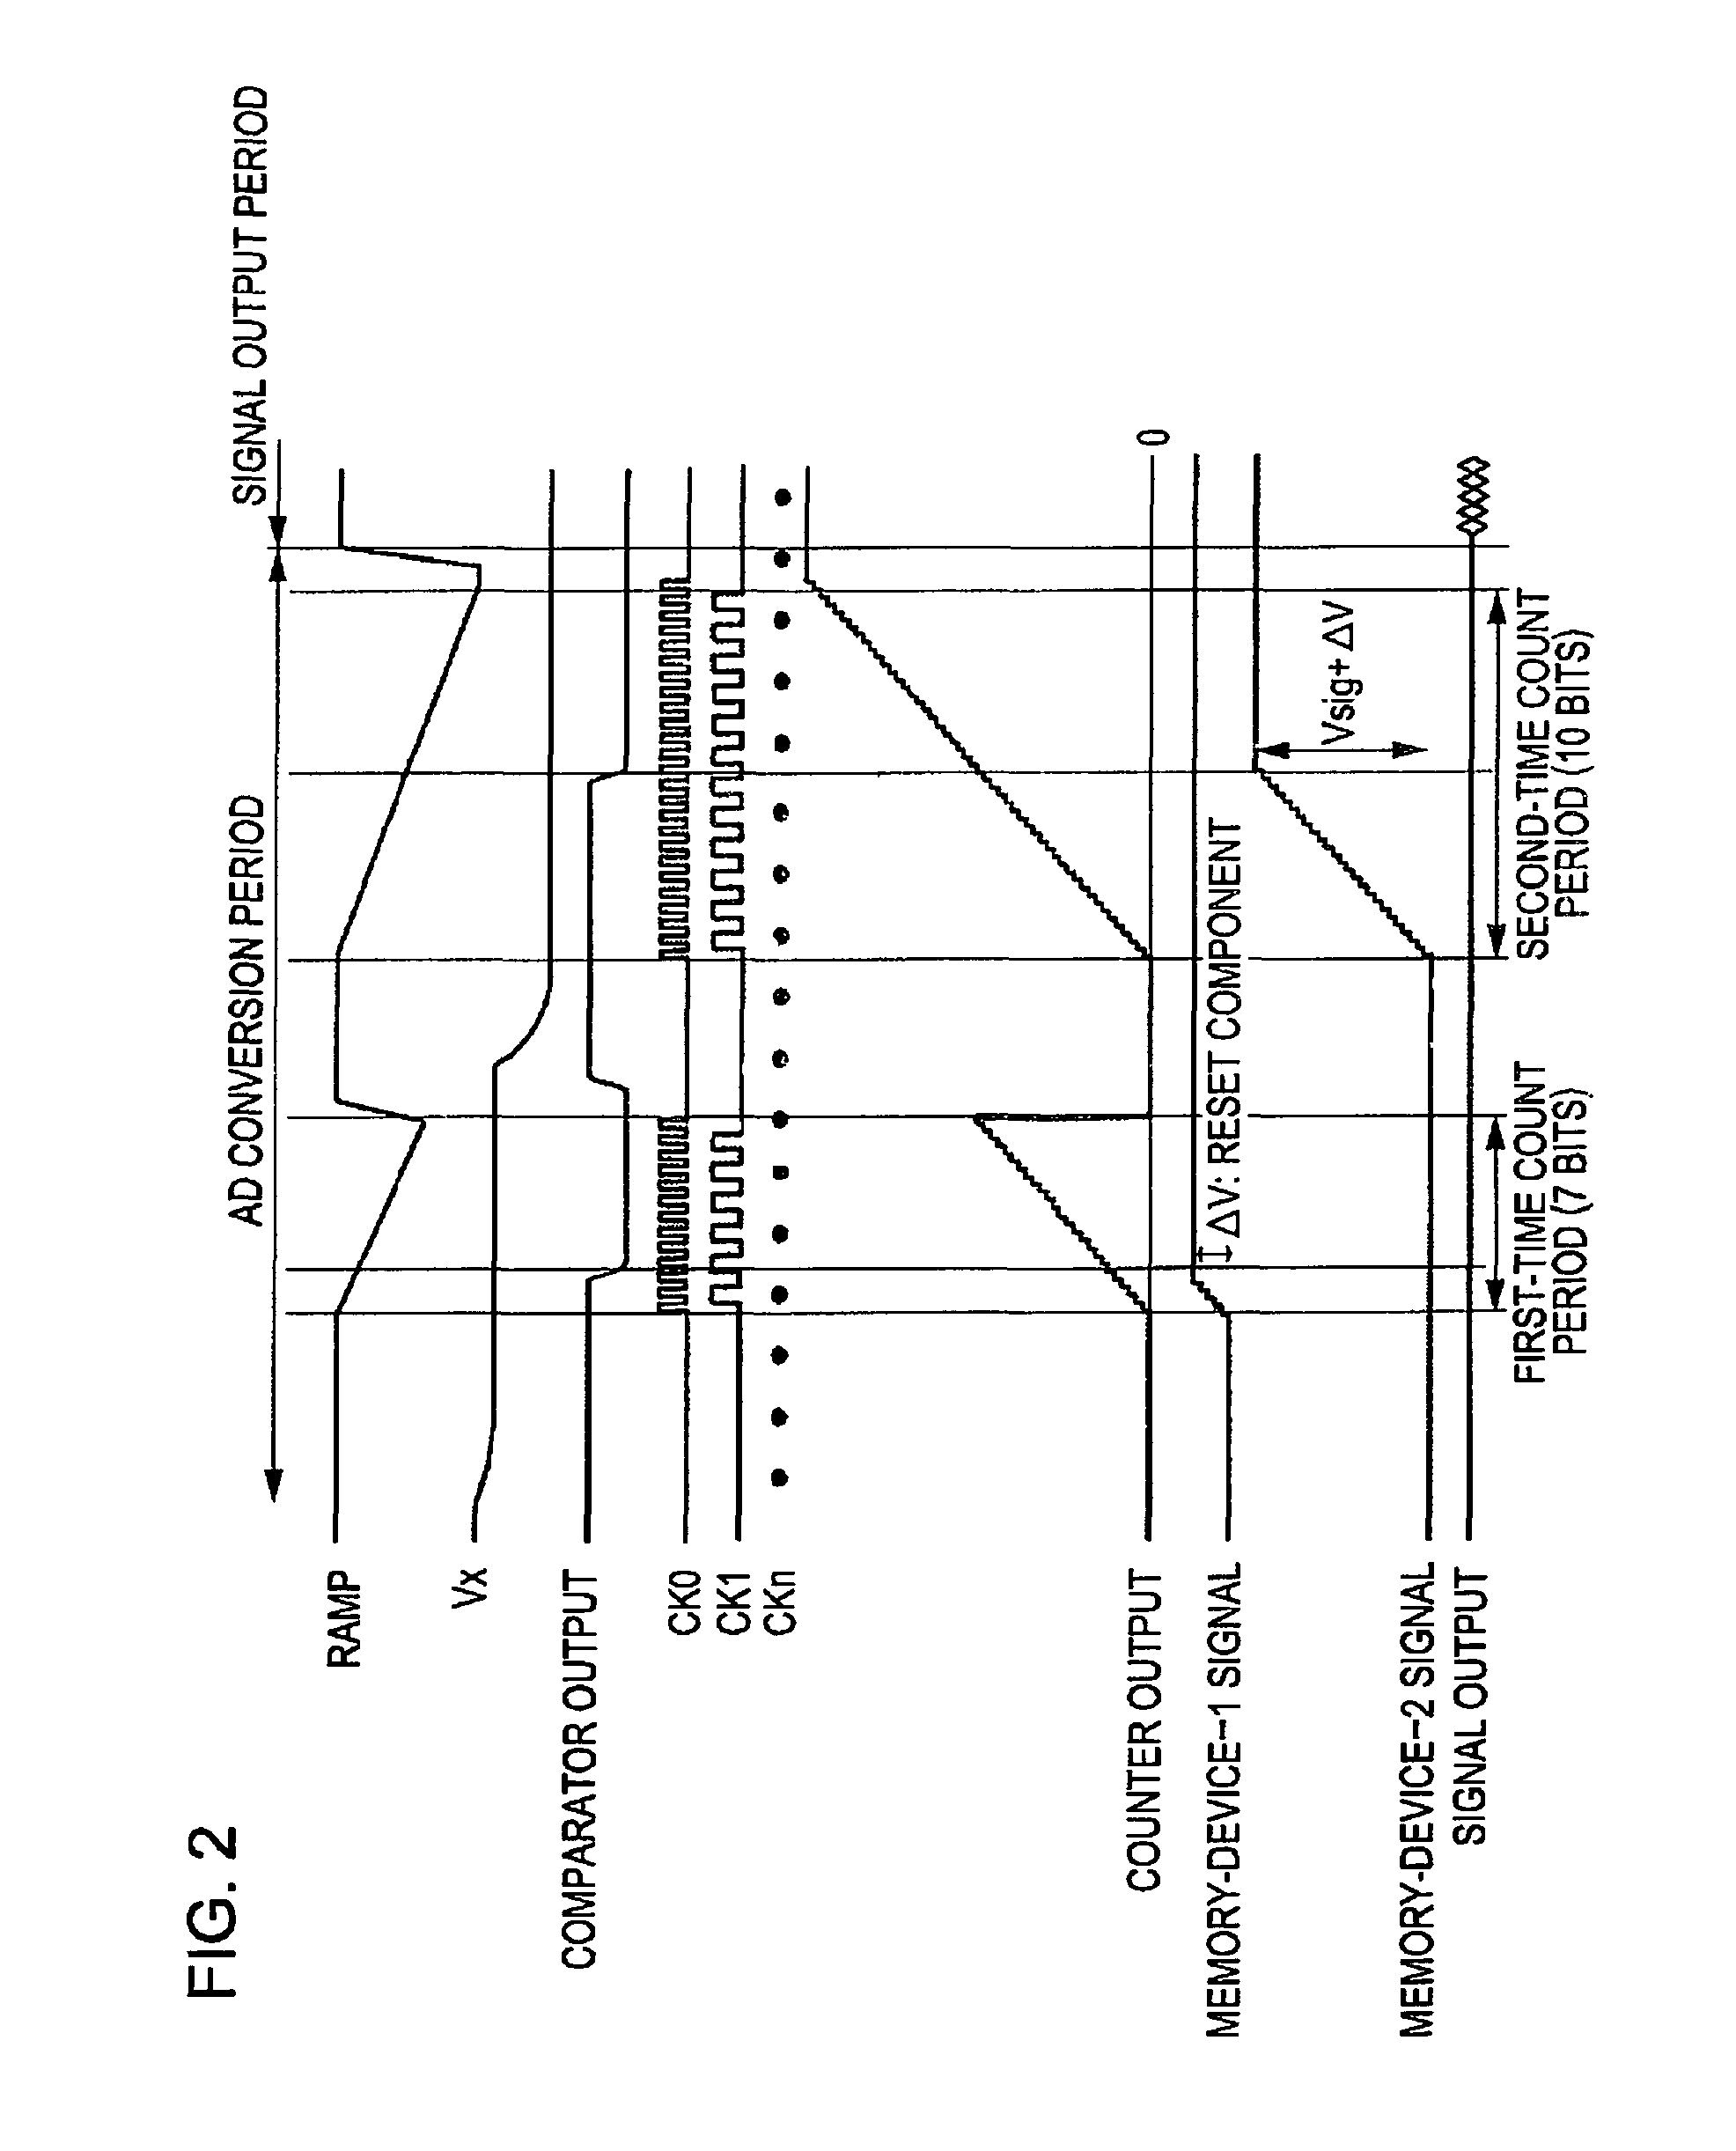 Solid state imaging device having built in signal transfer test circuitry